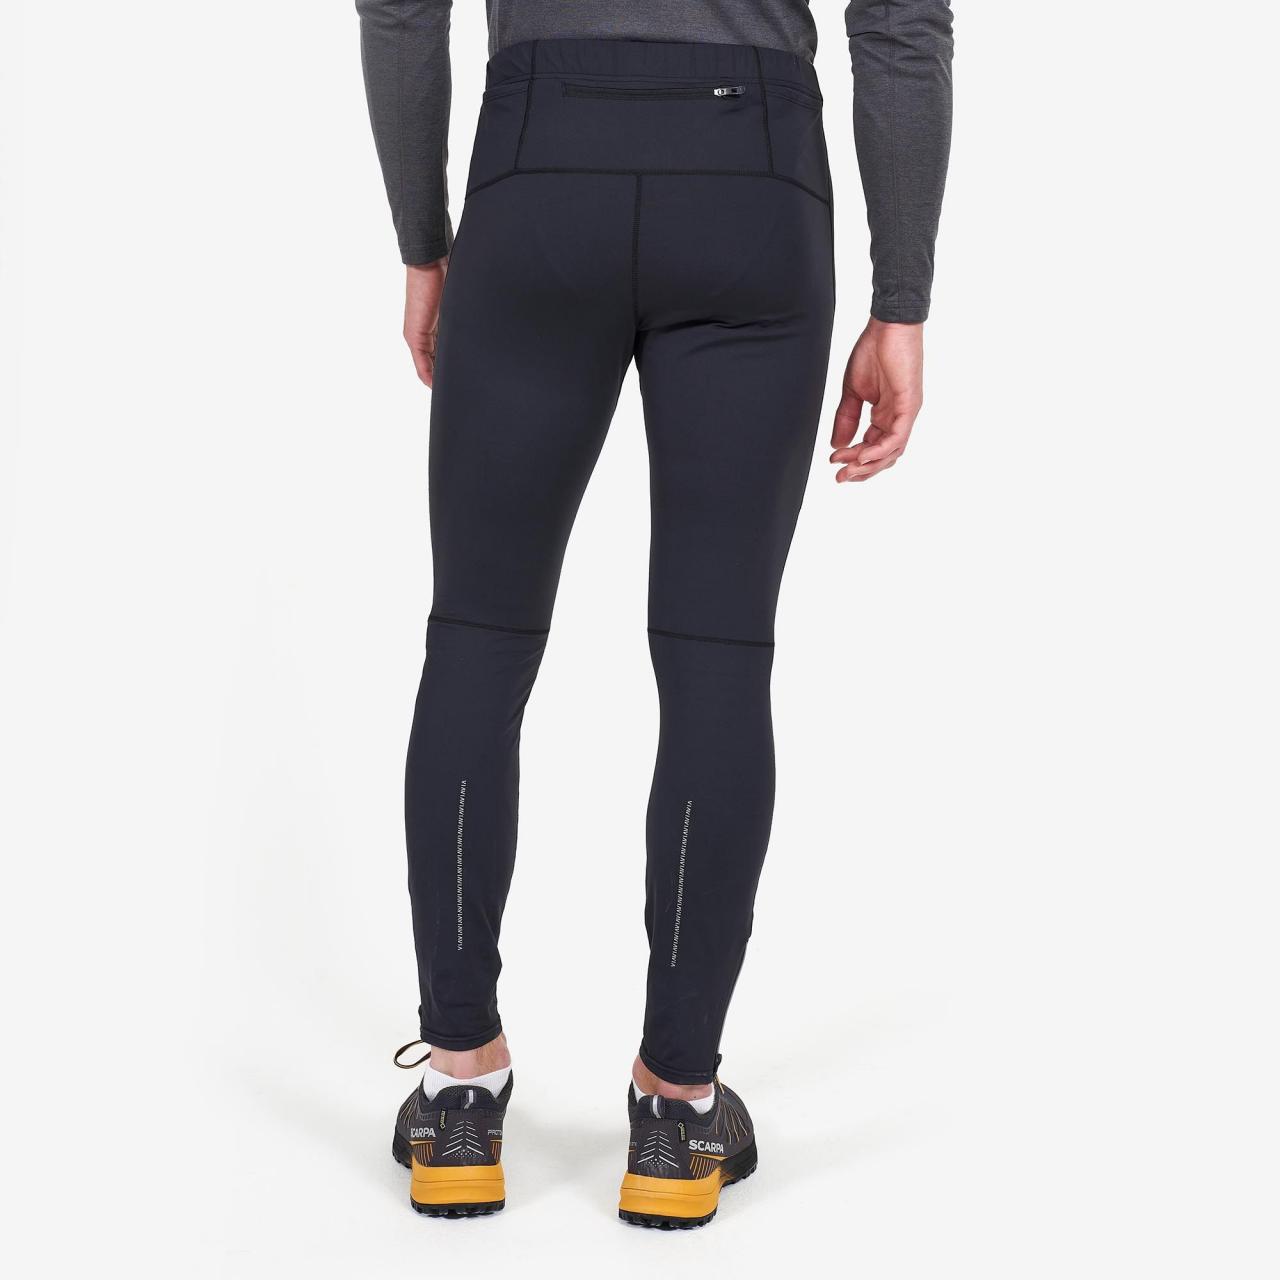 MONTANE Thermal Trail Tights Black